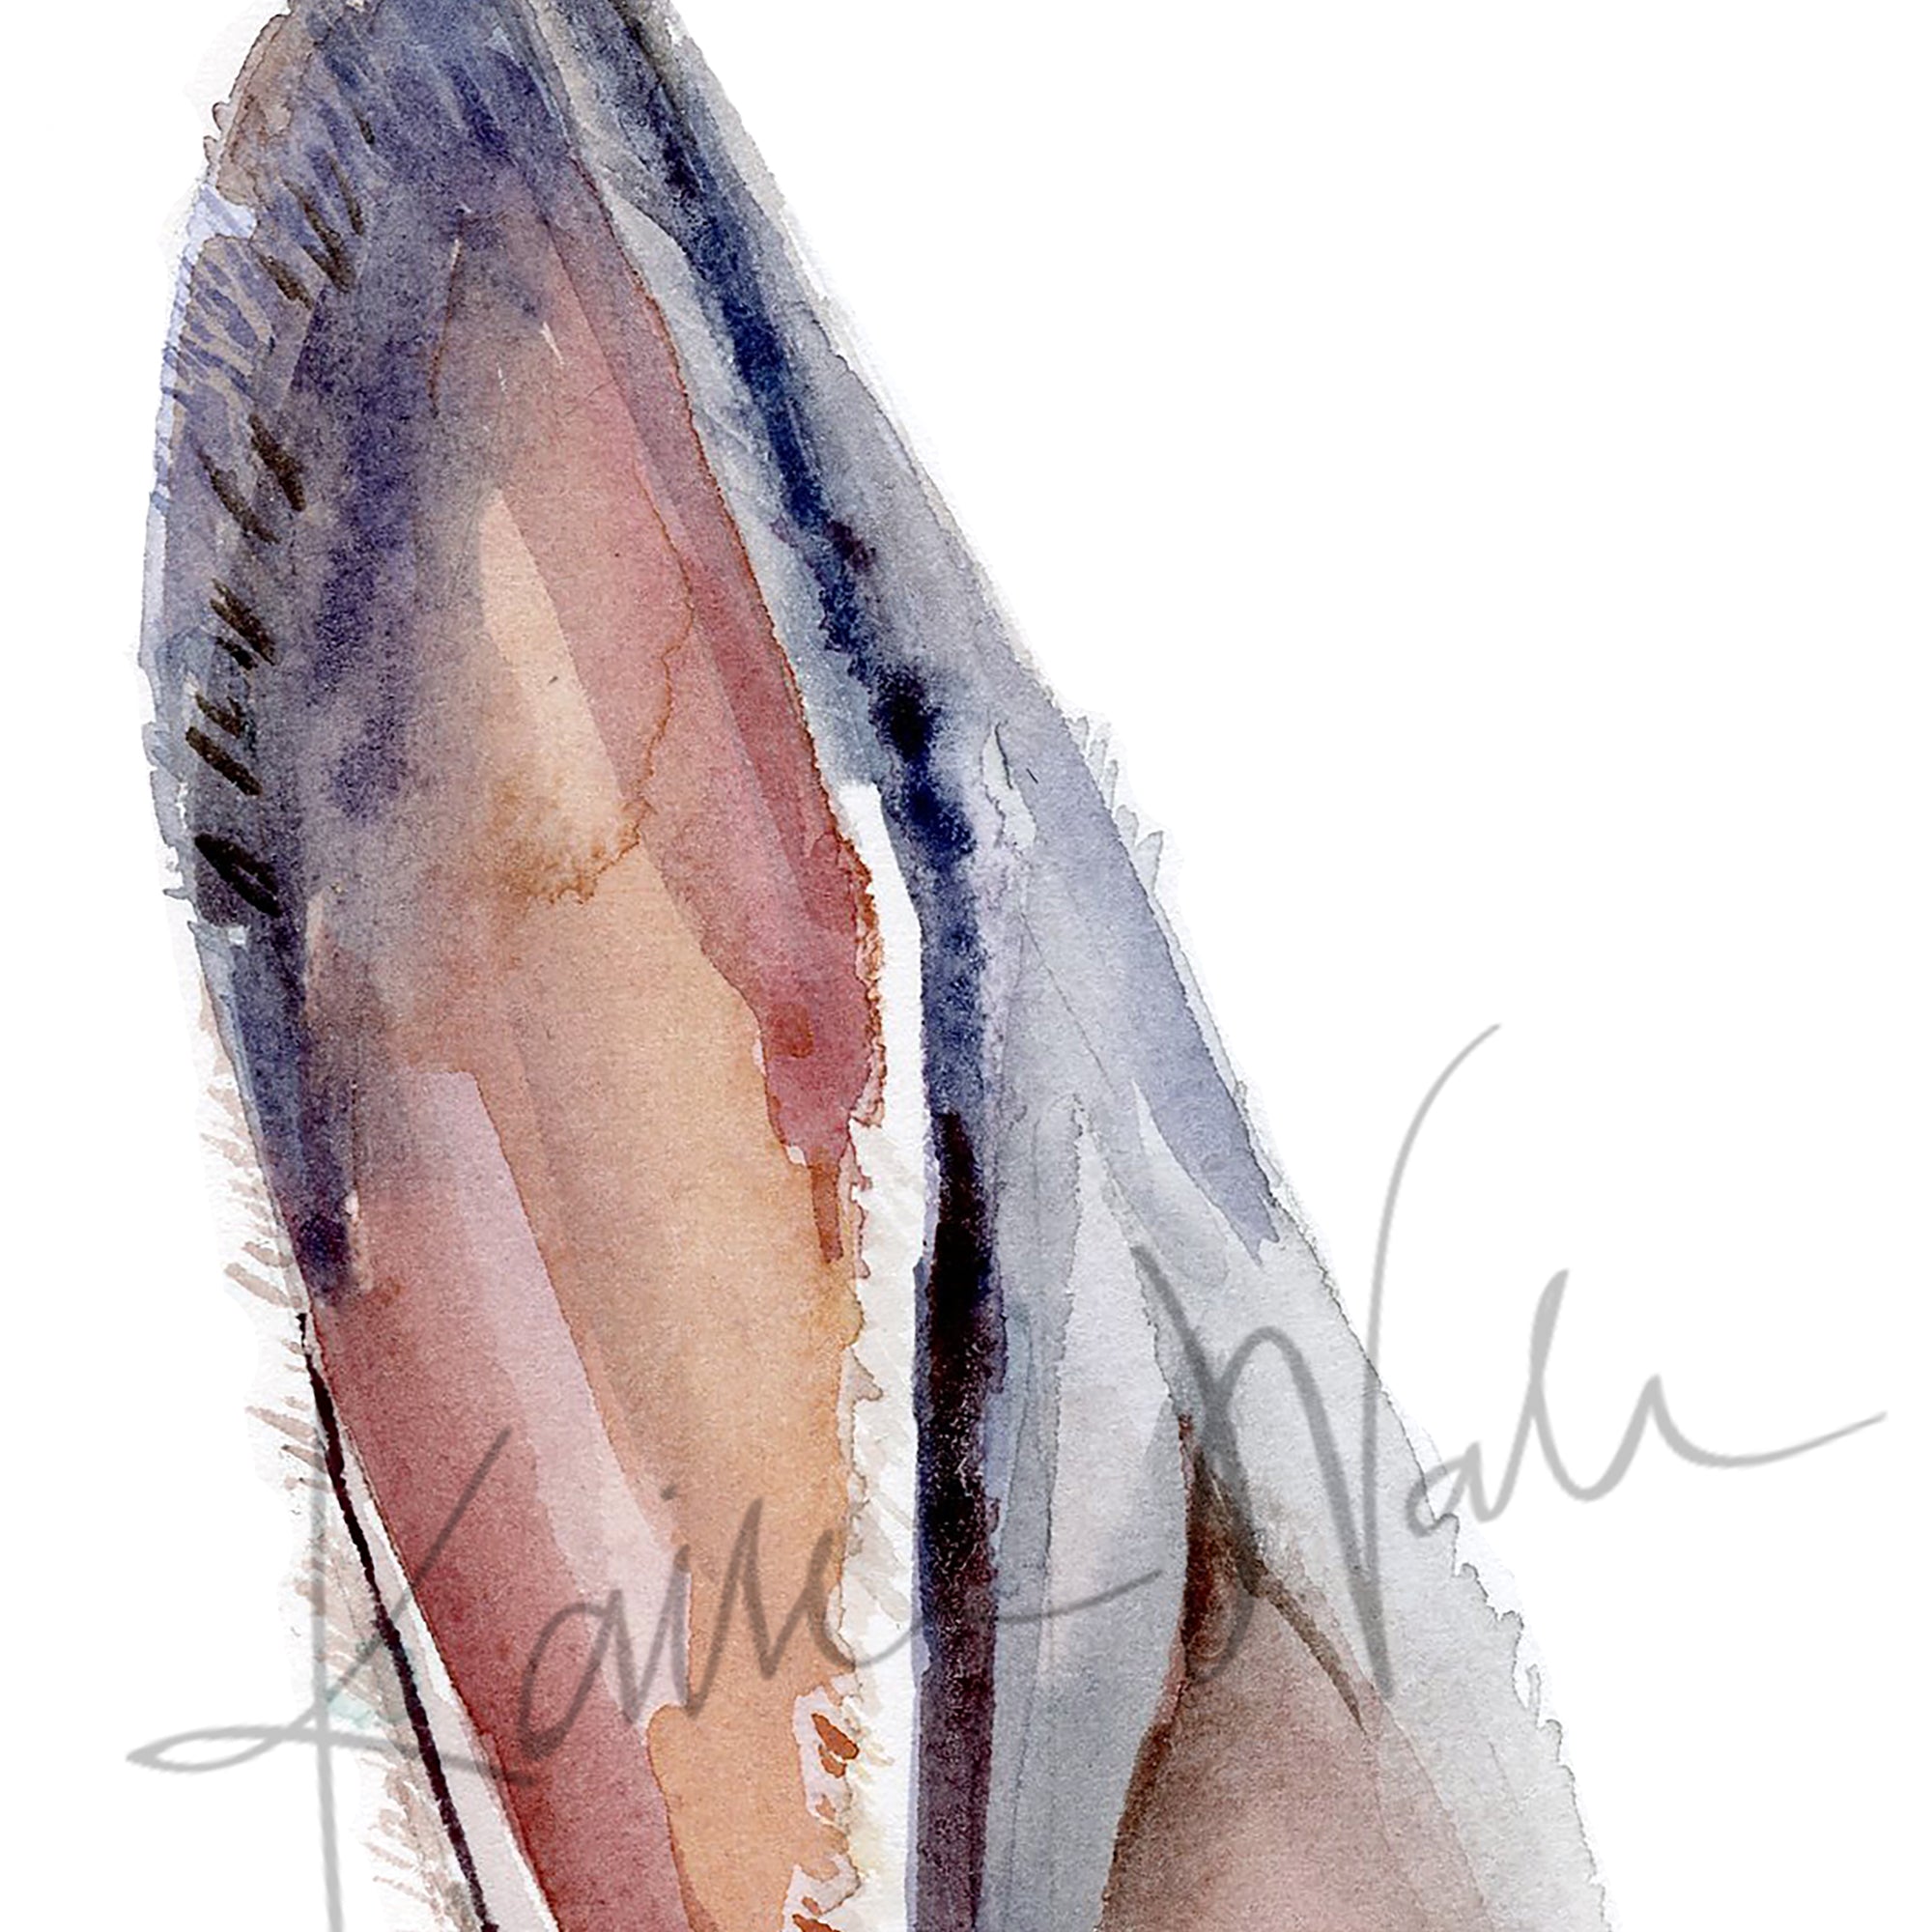 Zoomed in view of a watercolor painting of a zoomed in perspective of rabbit ears in tans, pinks, and browns.